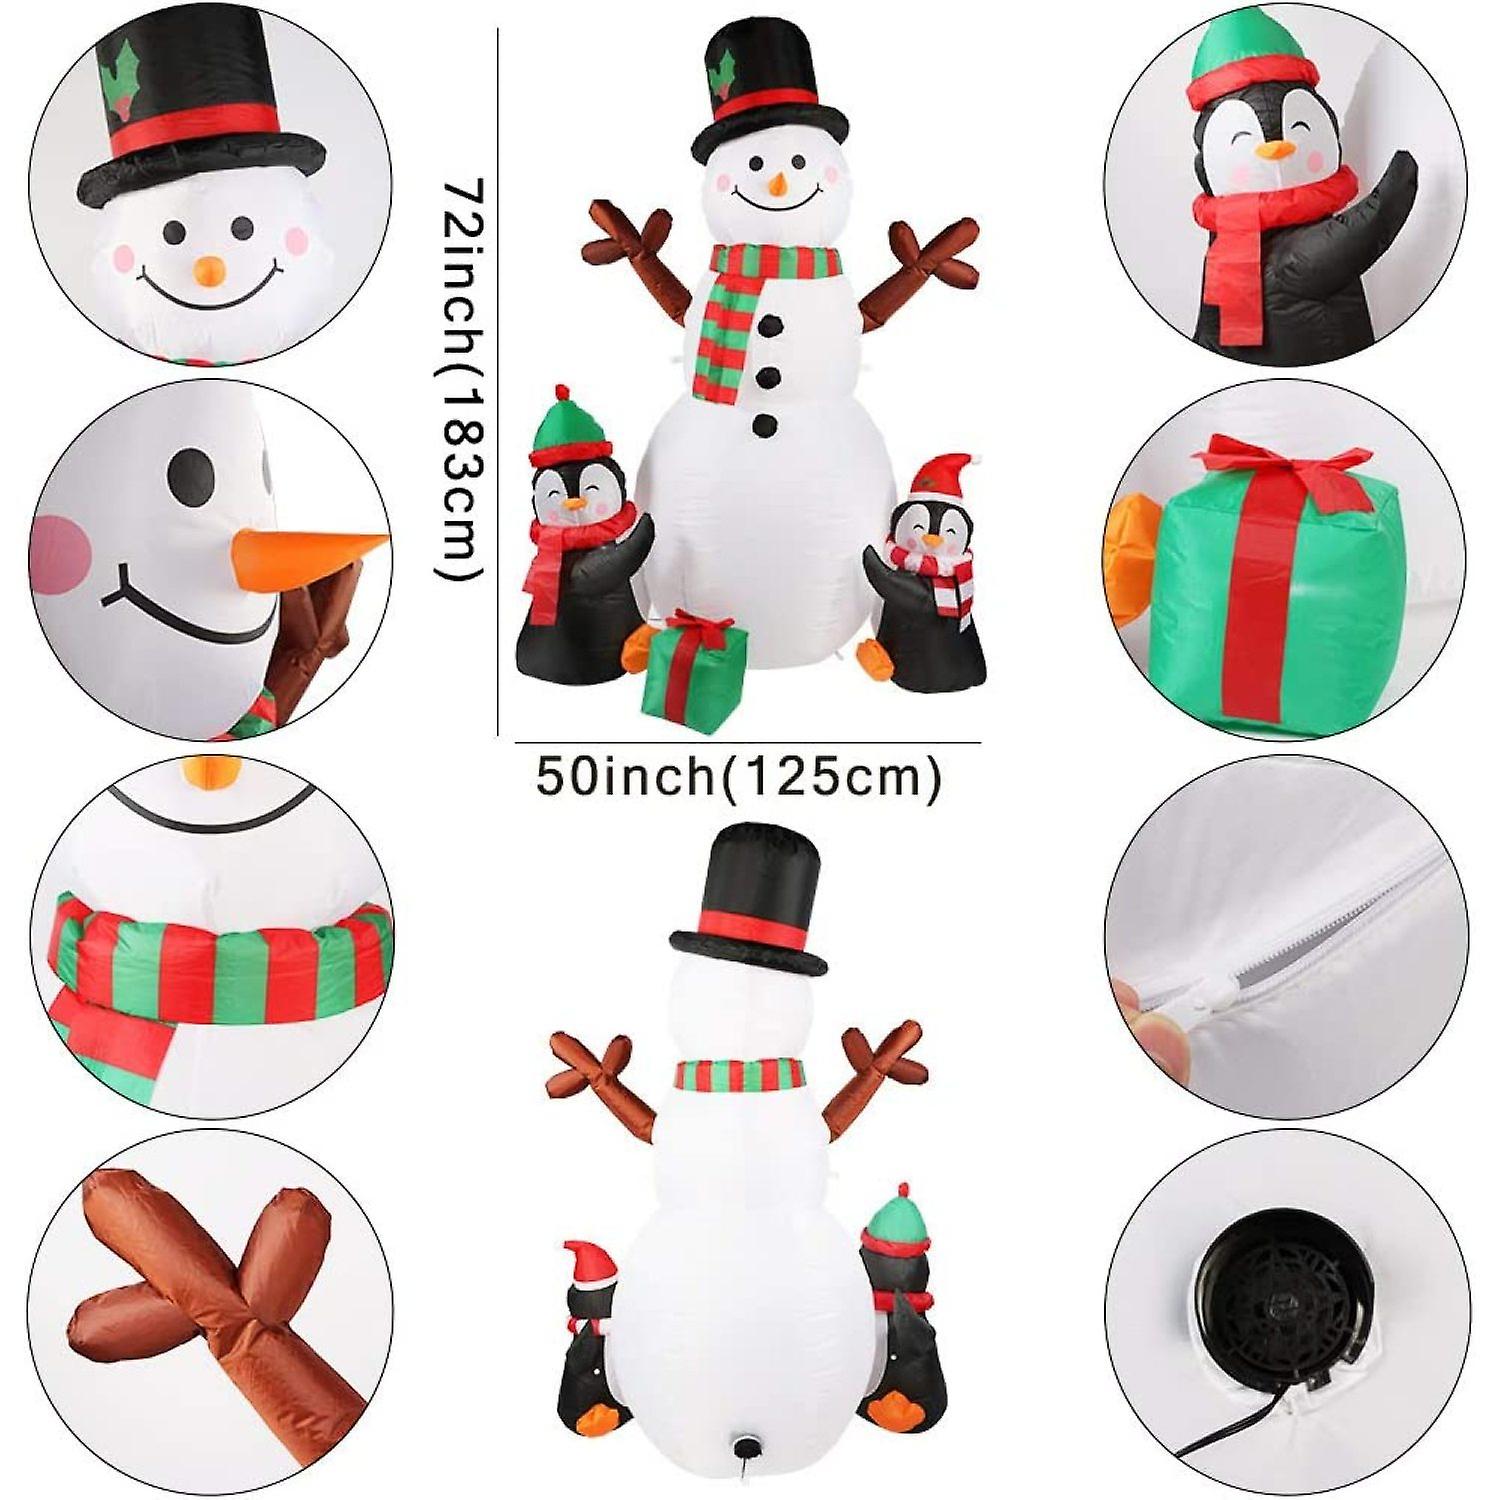 6ft Christmas Inflatables Christmas Decorations Outdoor， Inflatable Snowman Penguin Blow Up Yard Decorations With Rotating Led Lights For Indoor Outdo